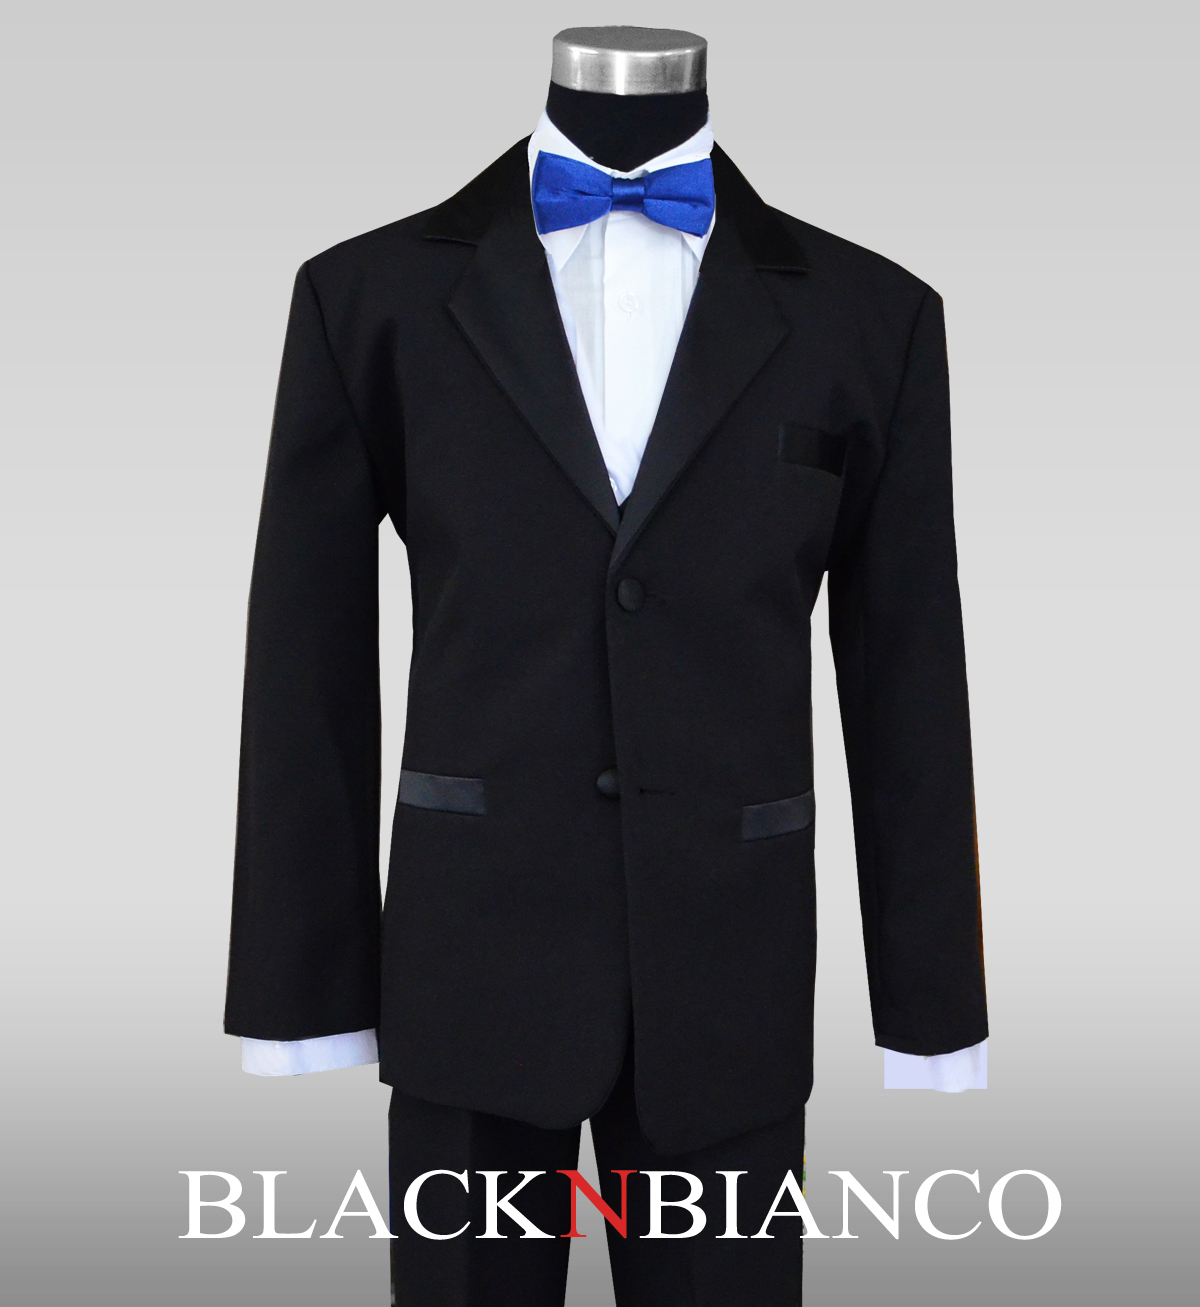 Boys Tuxedos in Black with Royal Blue Bow Tie and Black Bow Tie - image 3 of 5